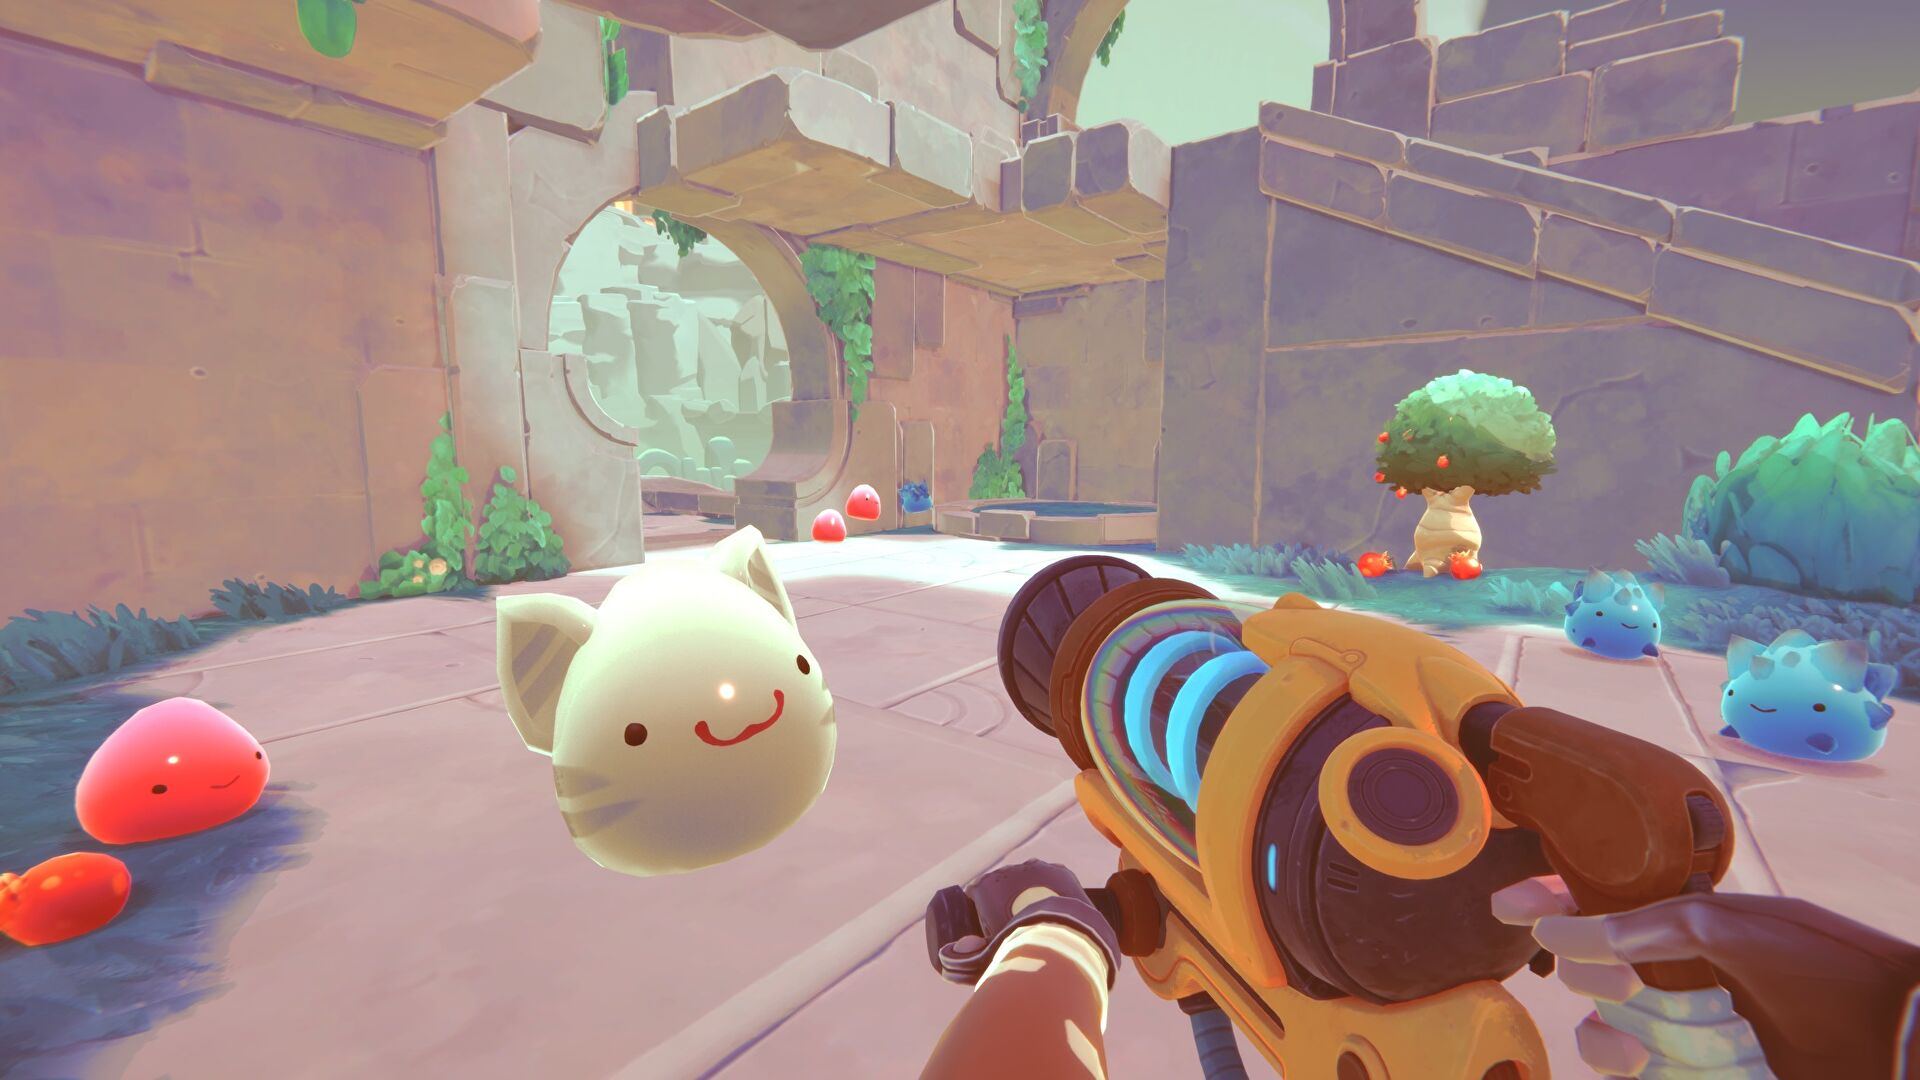 Does Slime Rancher 2 Have a Multiplayer? - GameRiv